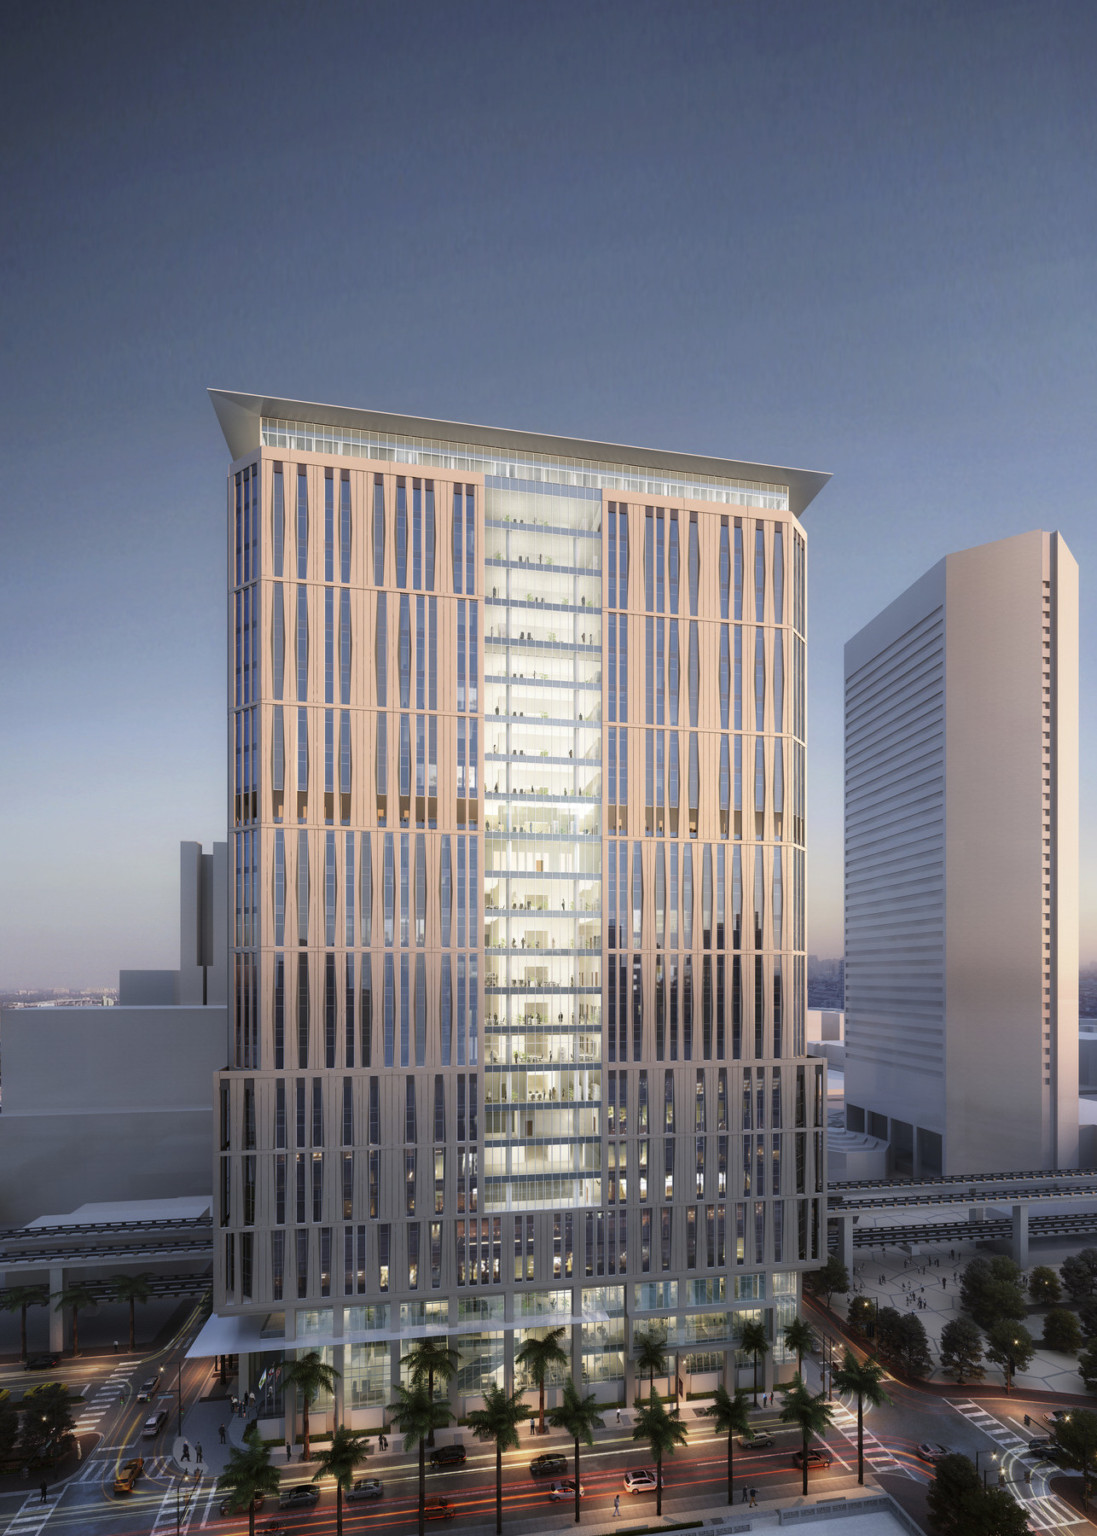 Rendering of a 25 story beige tower with glass center section. The bottom is floor to ceiling windows